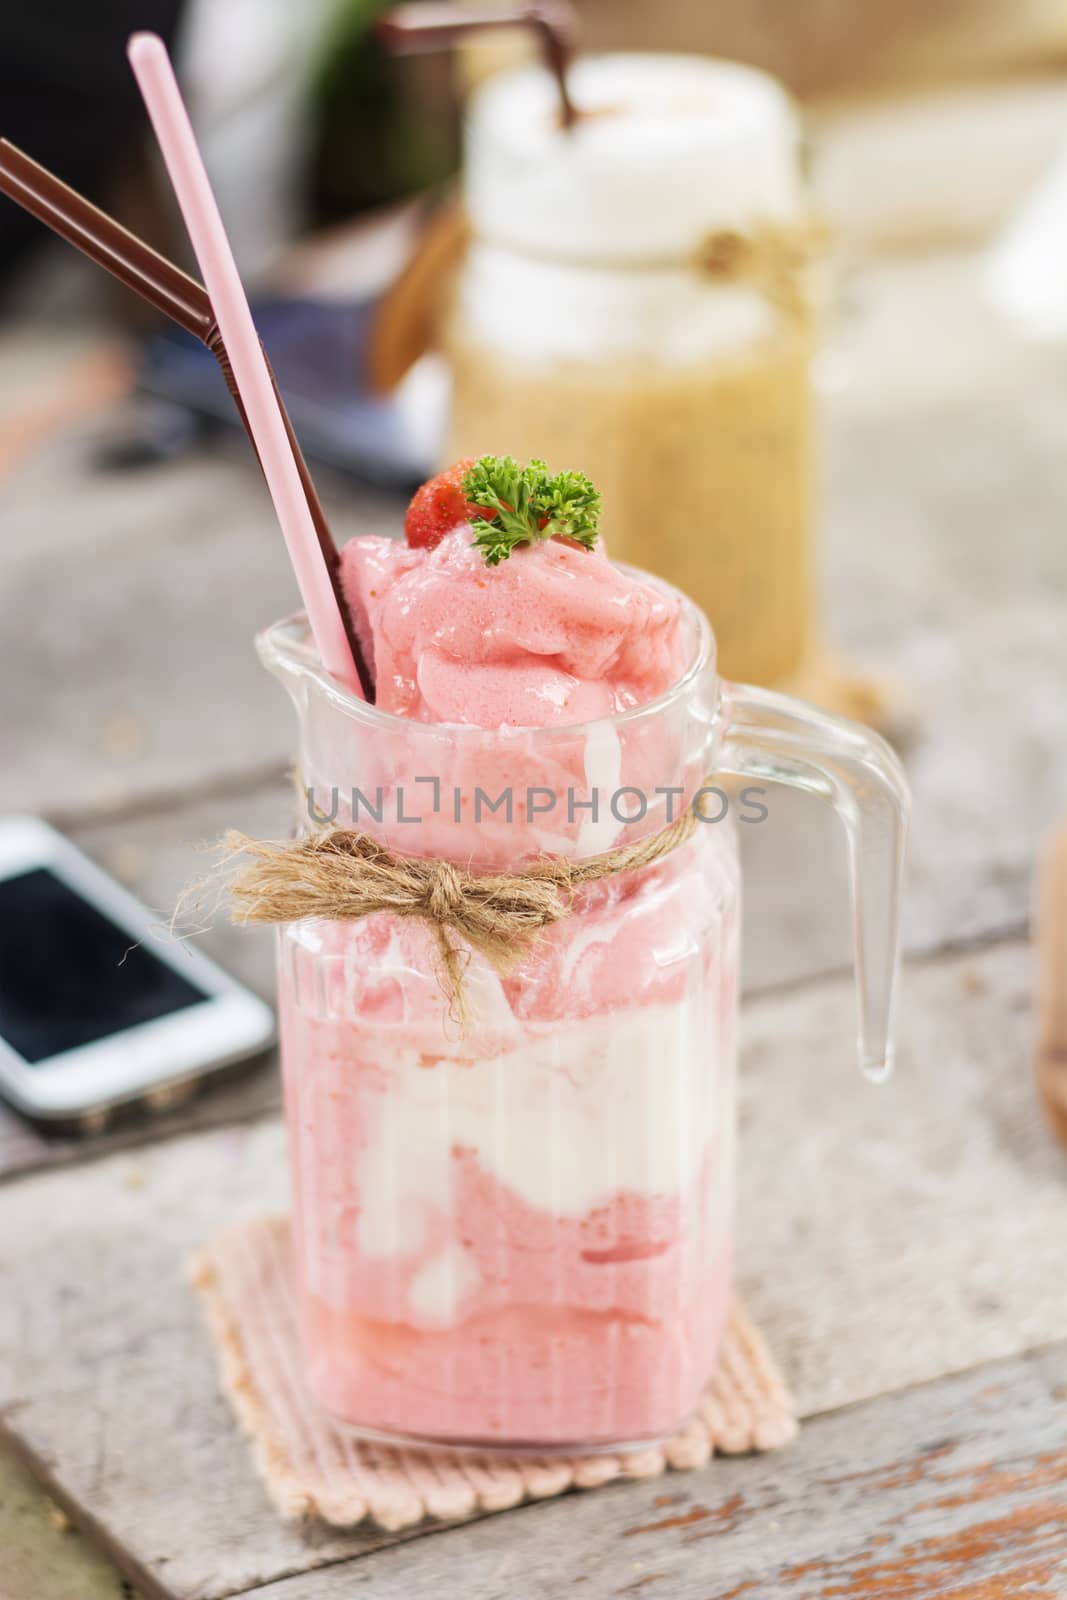 Strawberry smoothies in glass for summertime, selective focus on smoothies